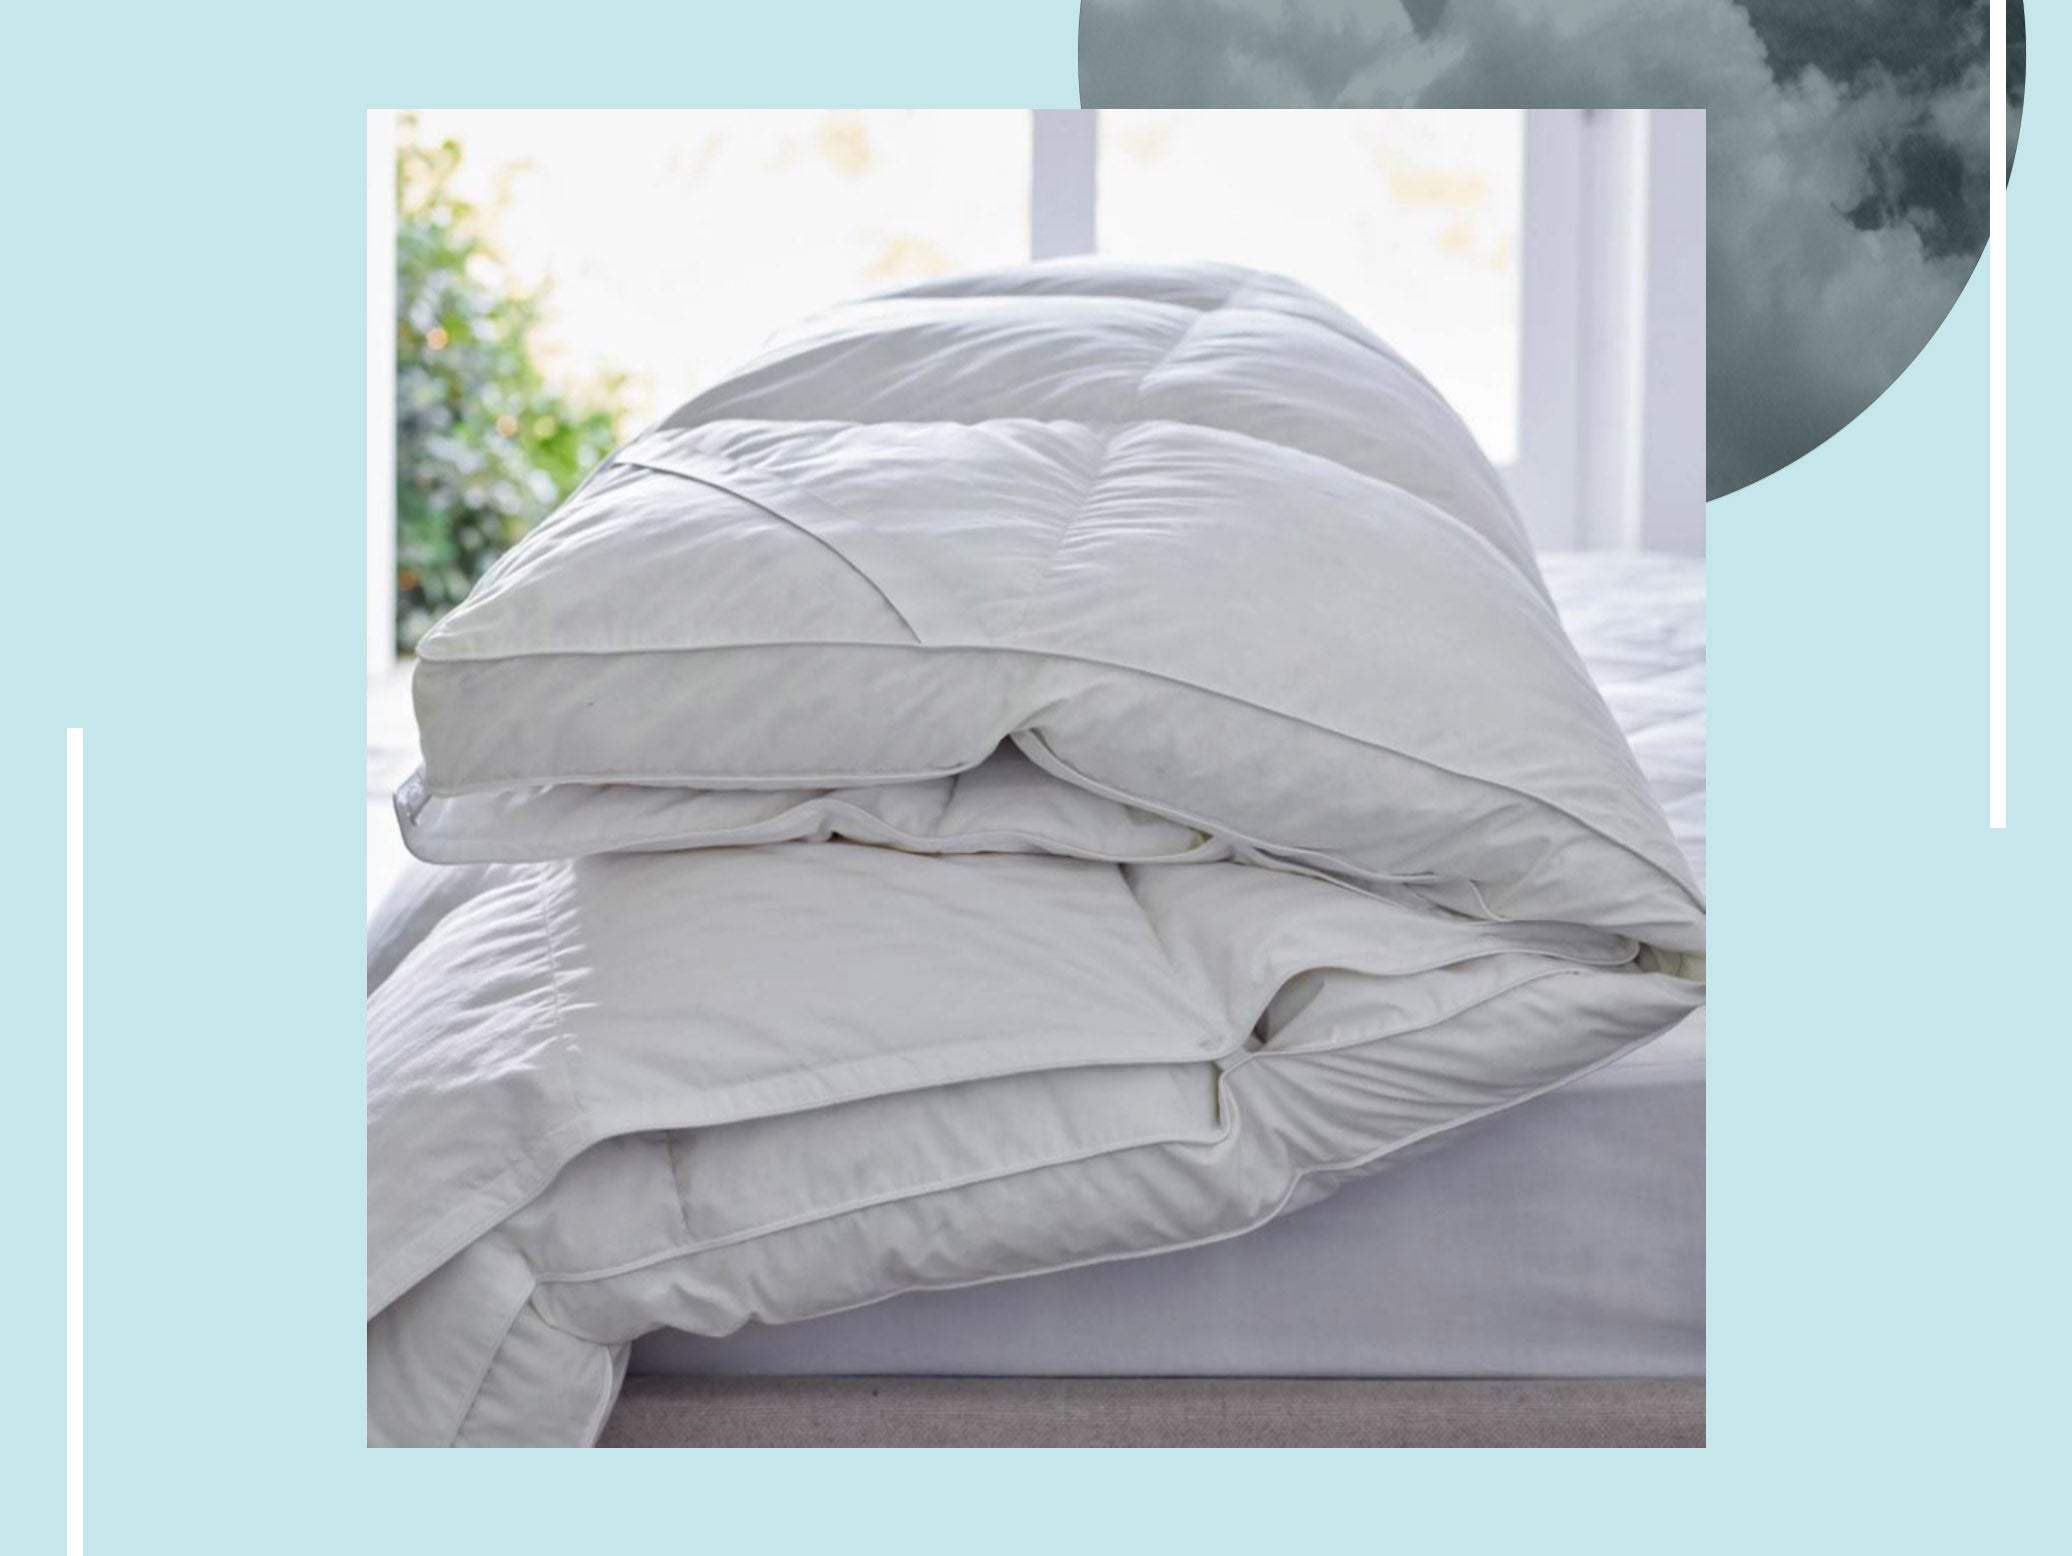 Foldable and squashy, this is a great topper if you want to feel you’re sinking into a cosy nest